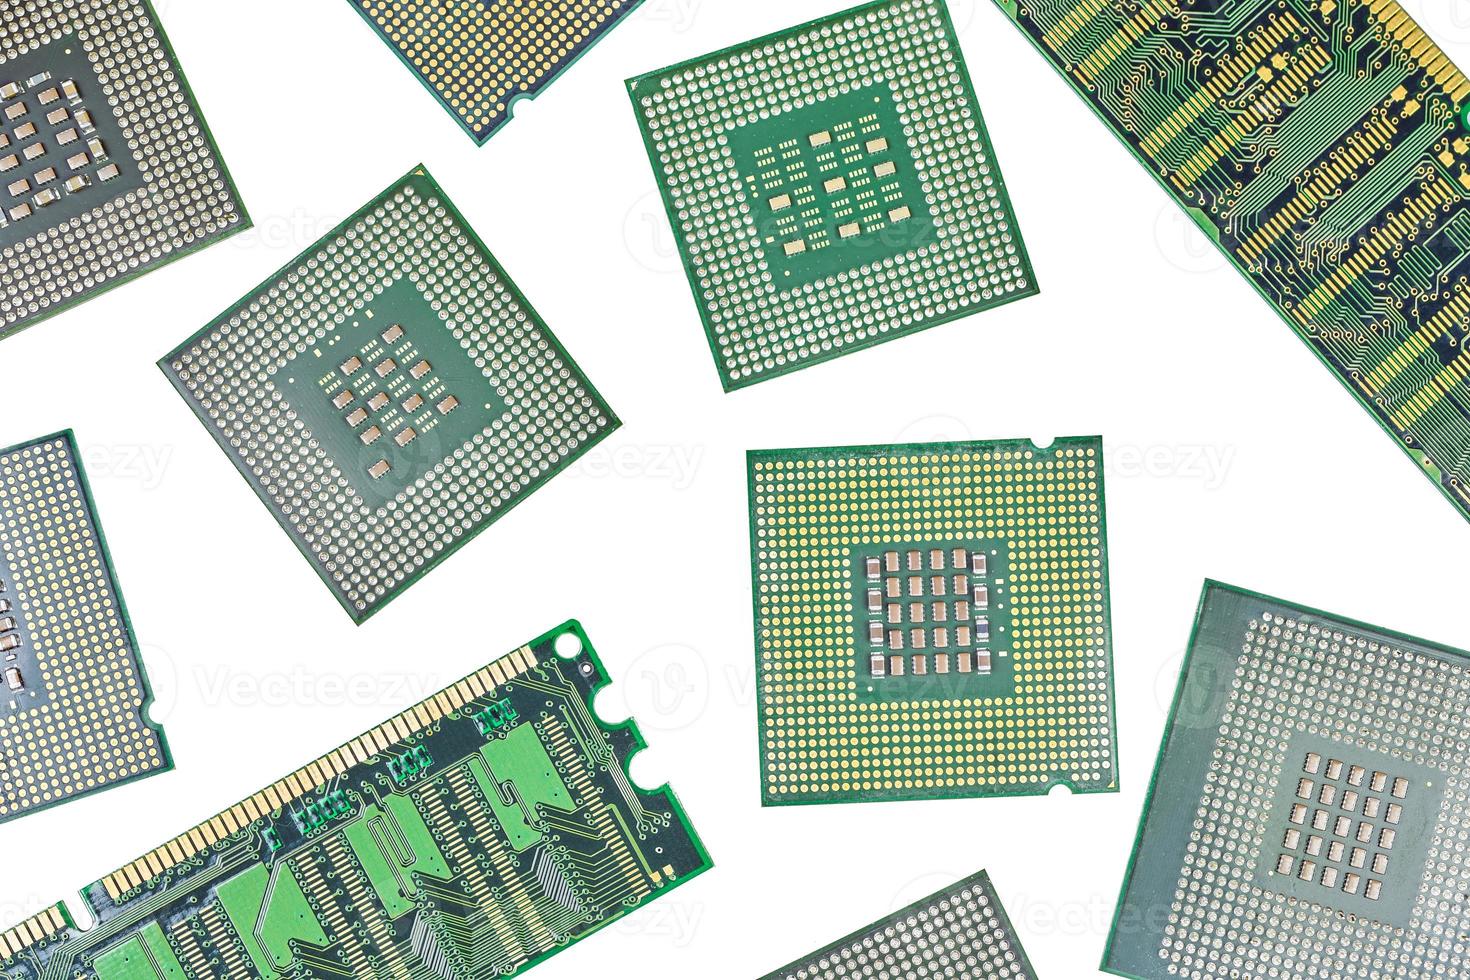 Bunch of CPU, central processor units and RAM, random-access memory, isolated background photo